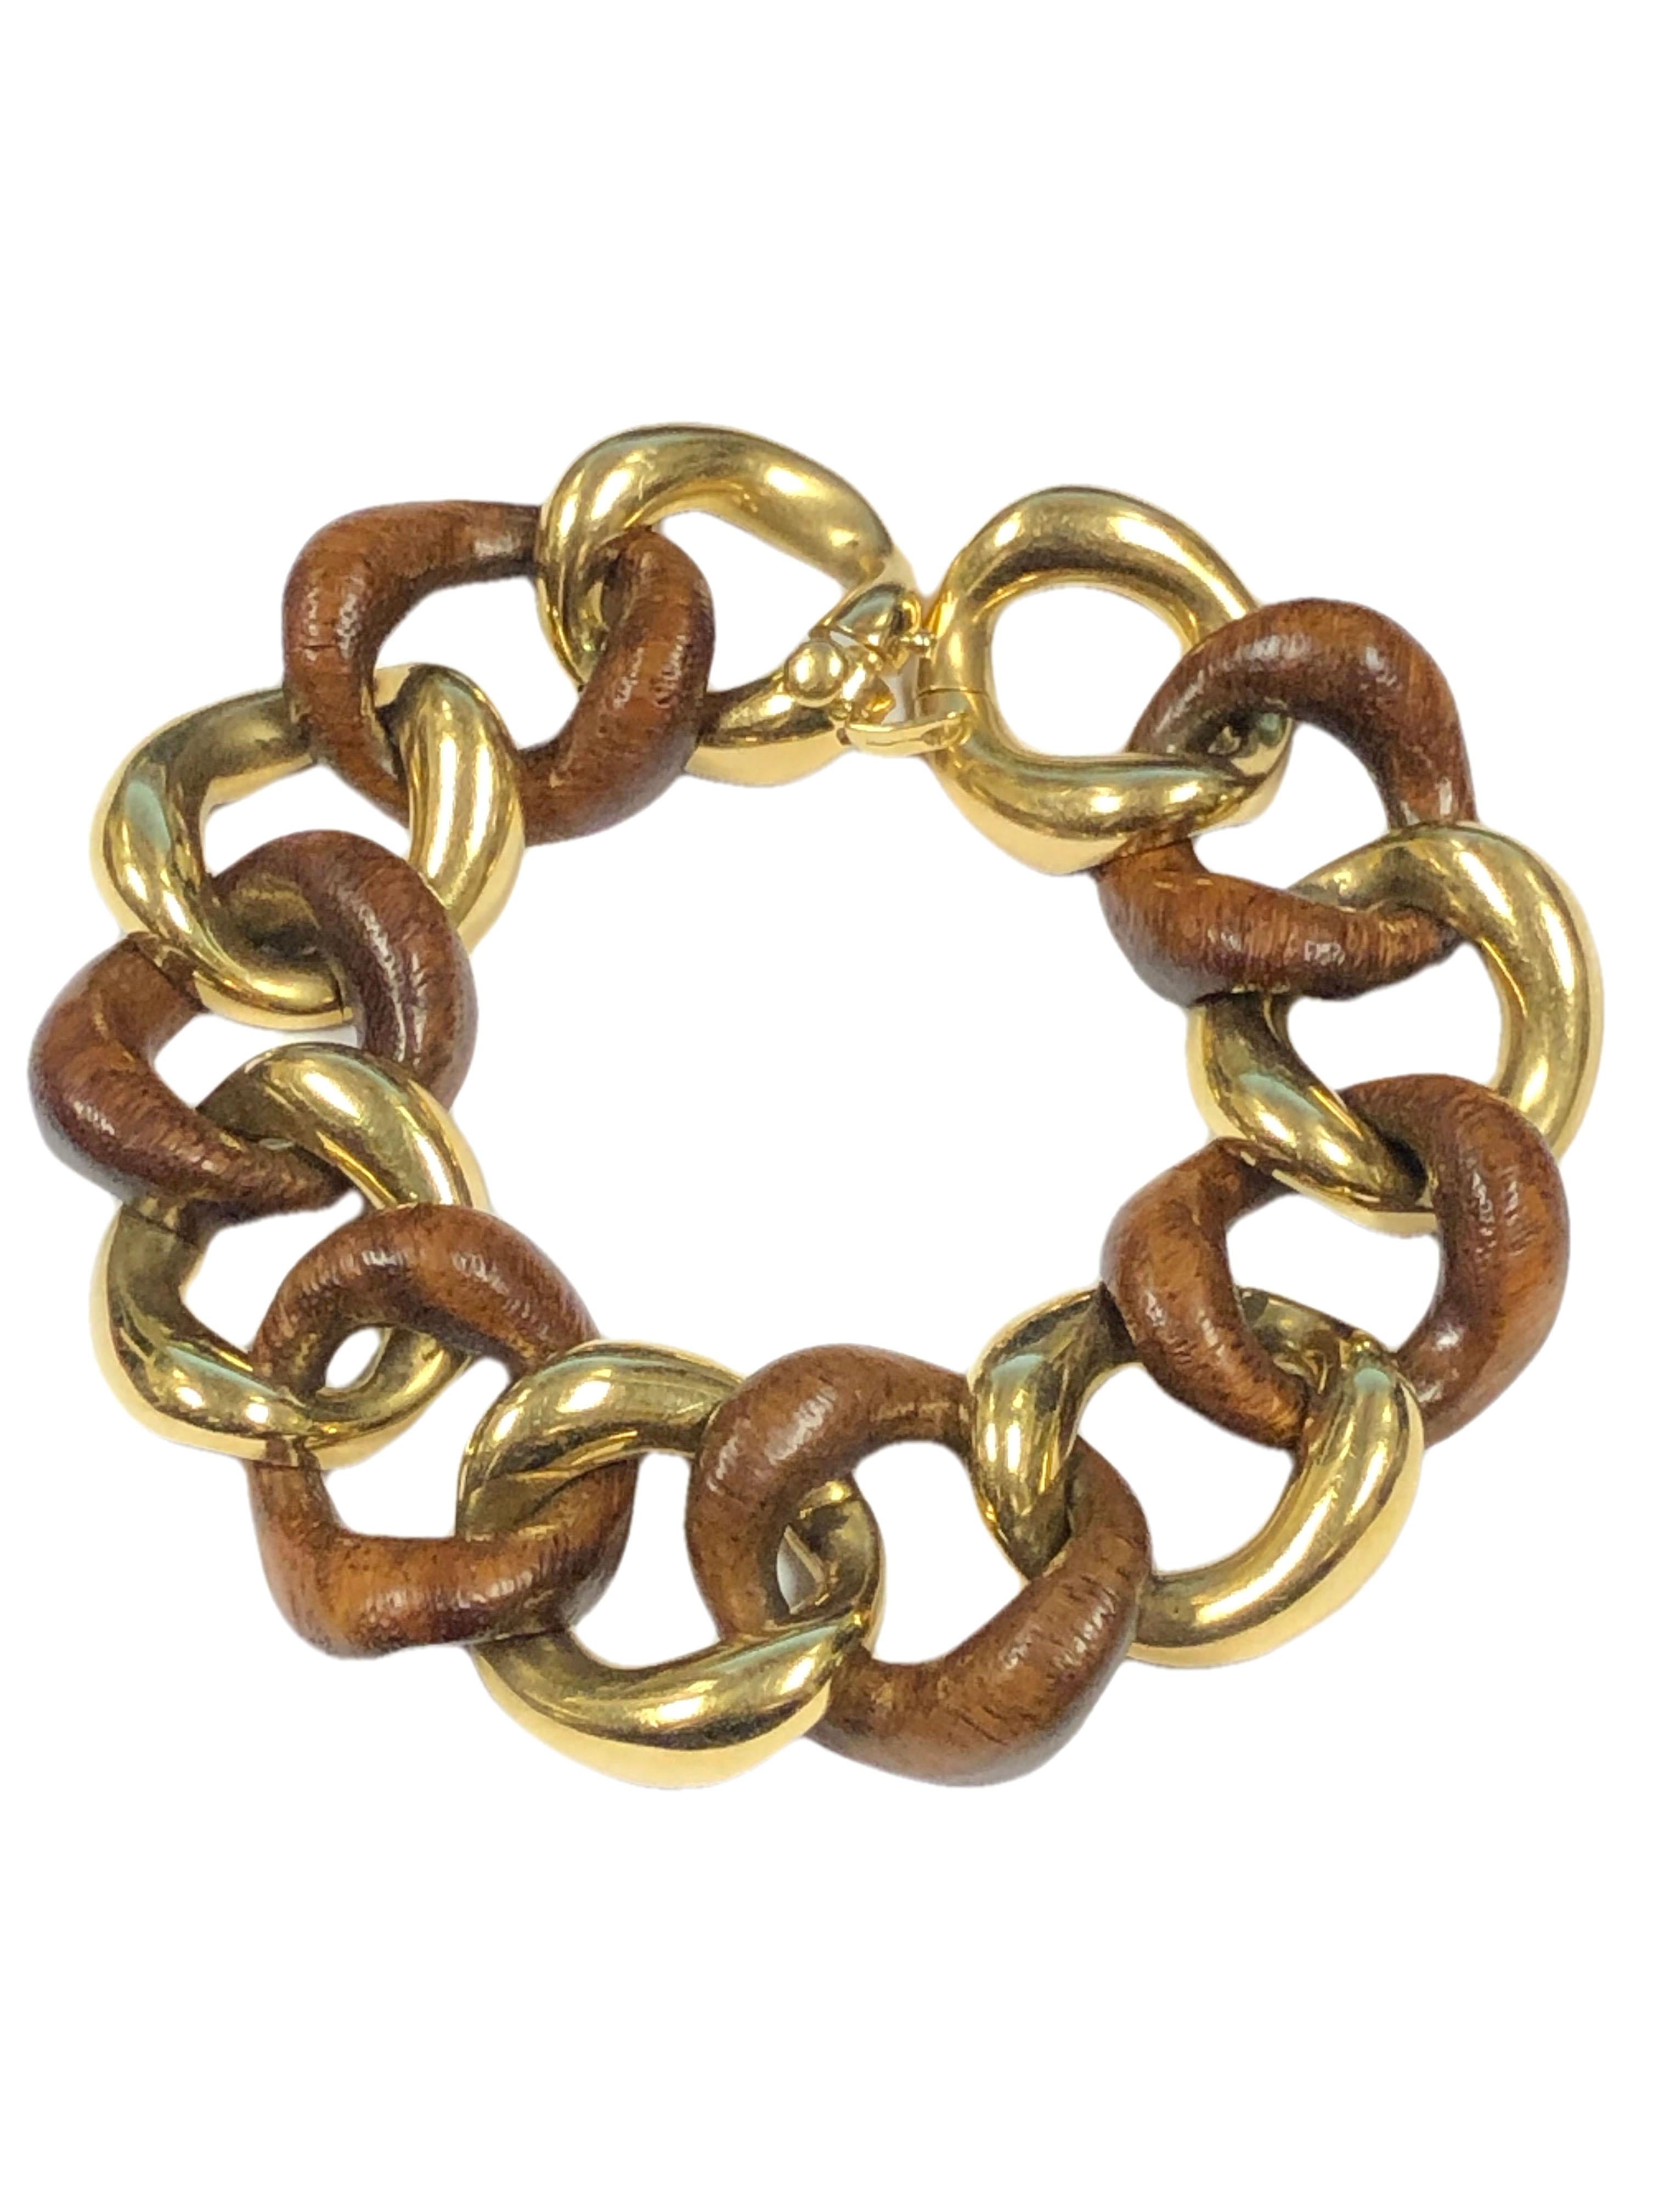 Circa 2005 Seaman Schepps 18K Yellow Gold and Wood Link Bracelet. Measuring 8 1/2 inches in length and 1 inch wide. This is in Excellent near unworn condition and comes in the original presentation box with outer box. 